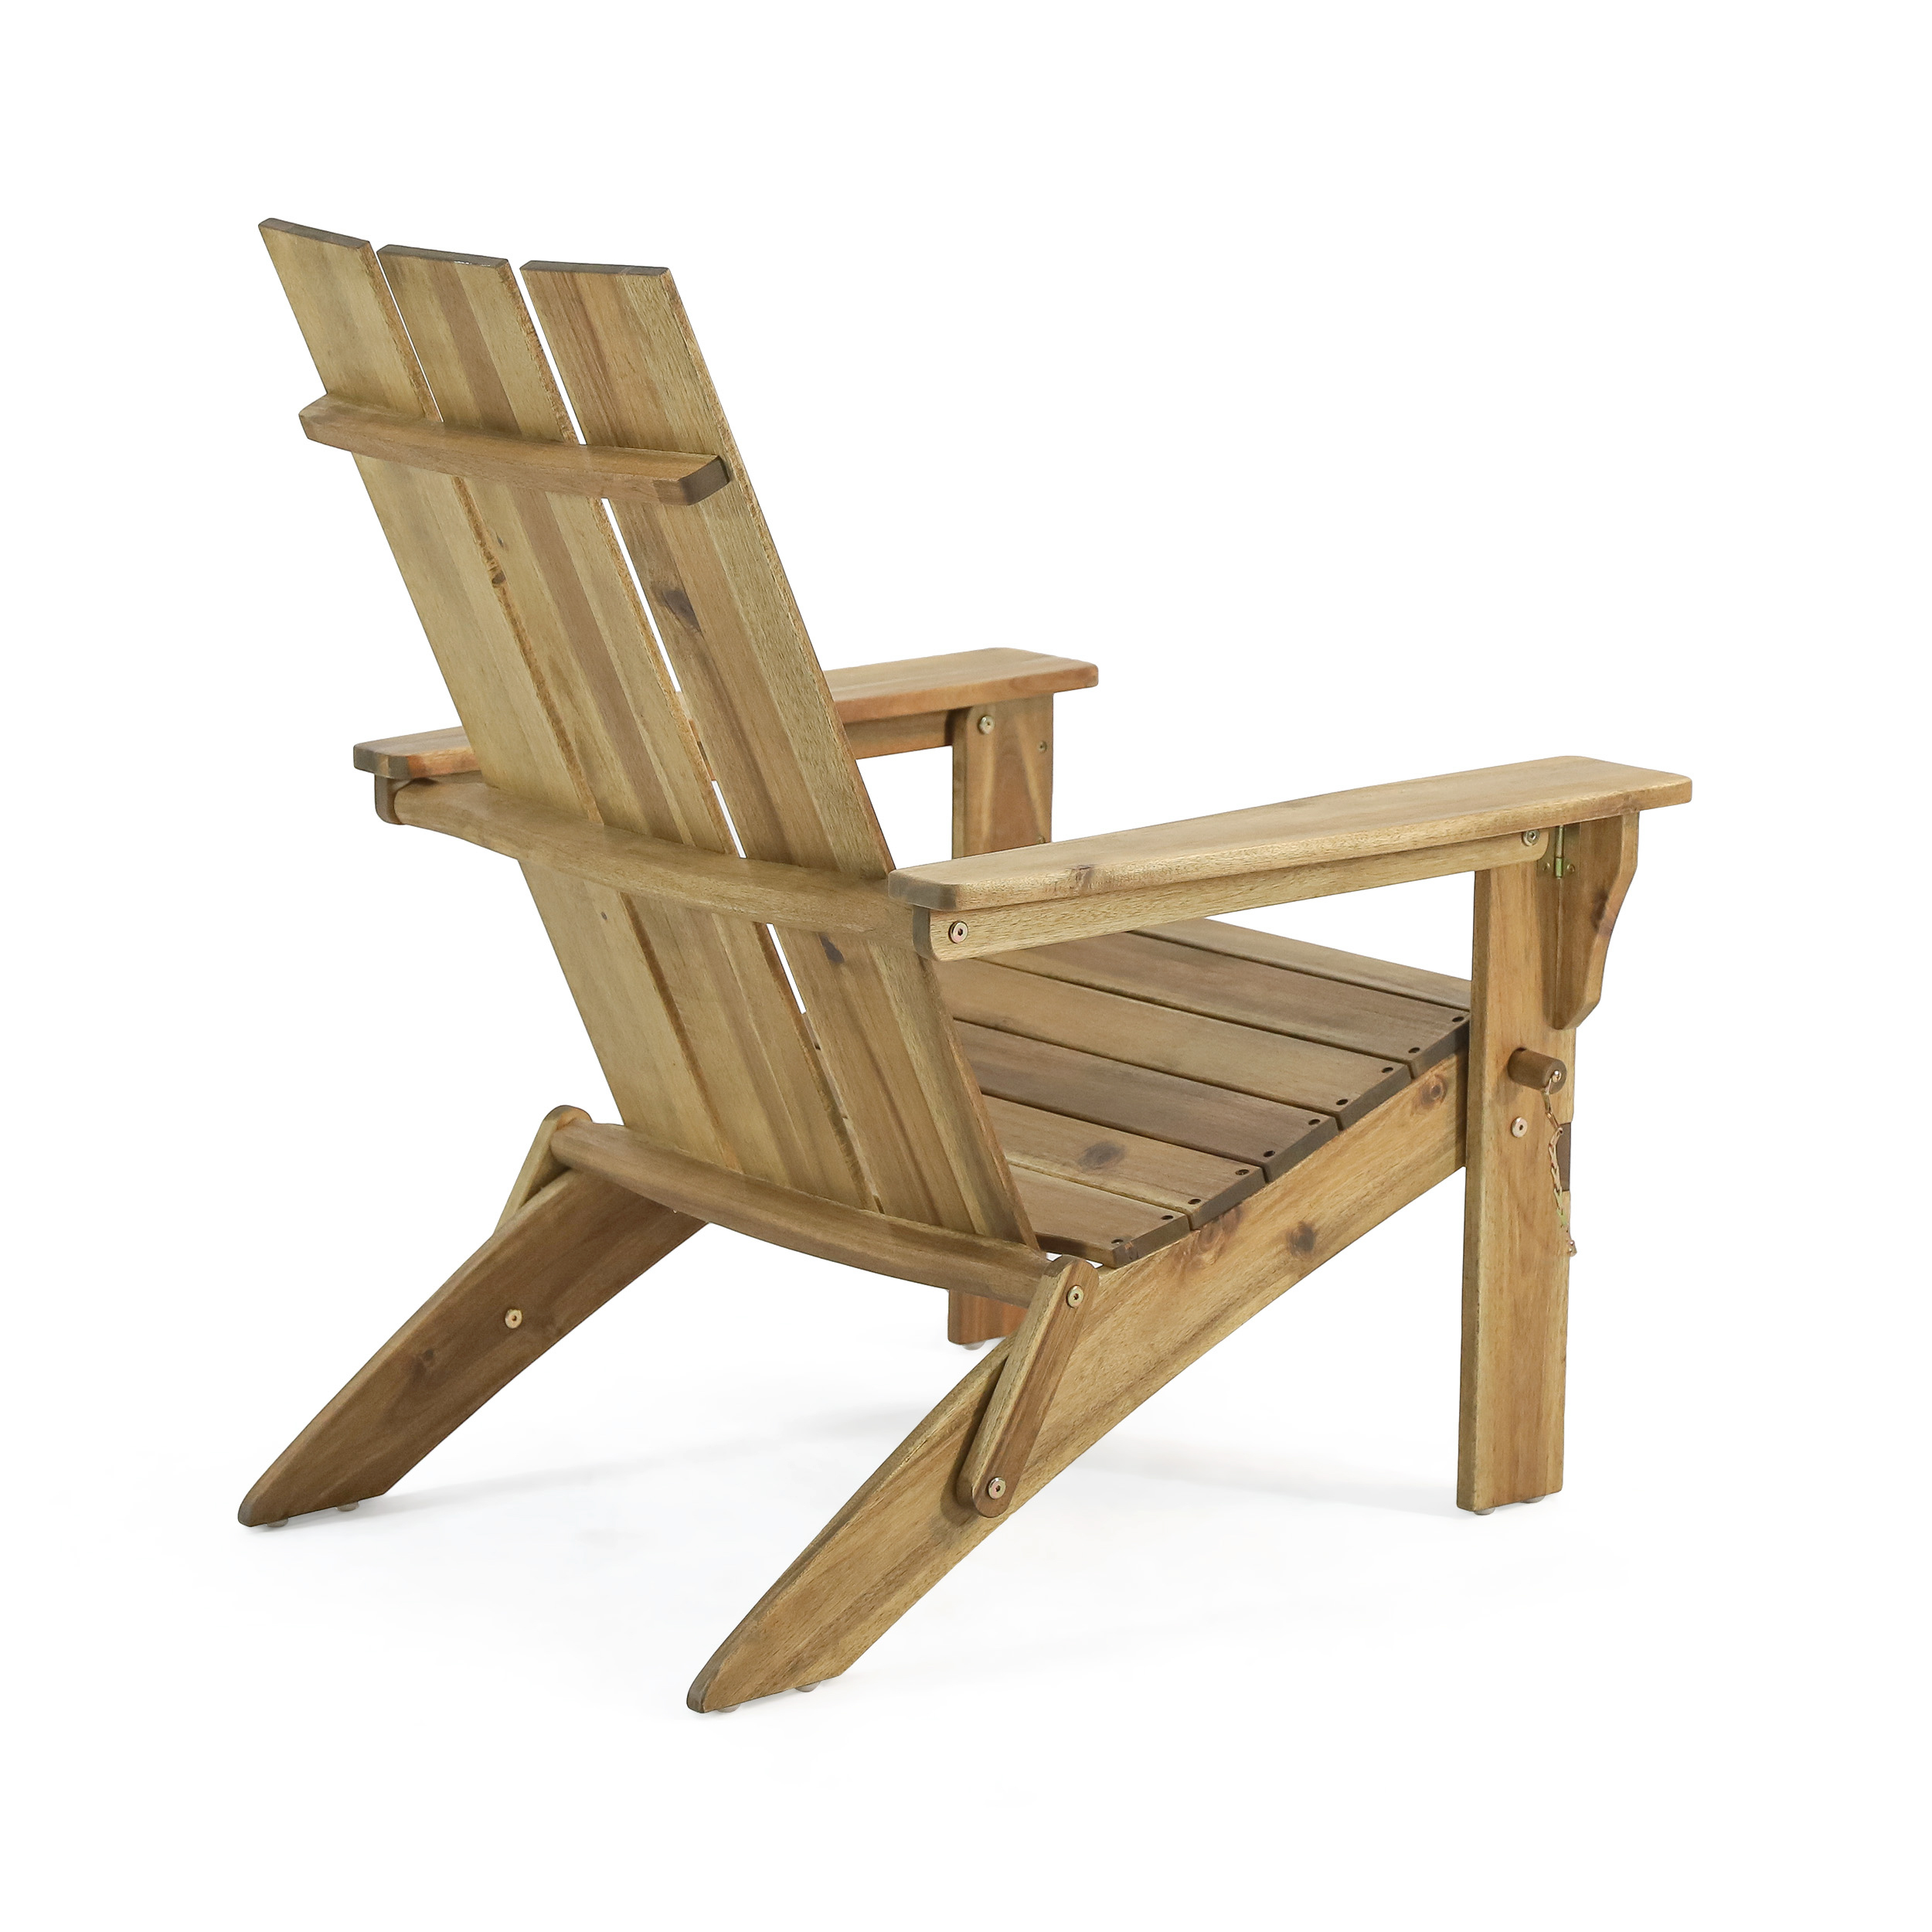 LANTRO JS Outdoor Classic Natural Color Solid Wood Adirondack Chair Garden Lounge Chair - image 3 of 5